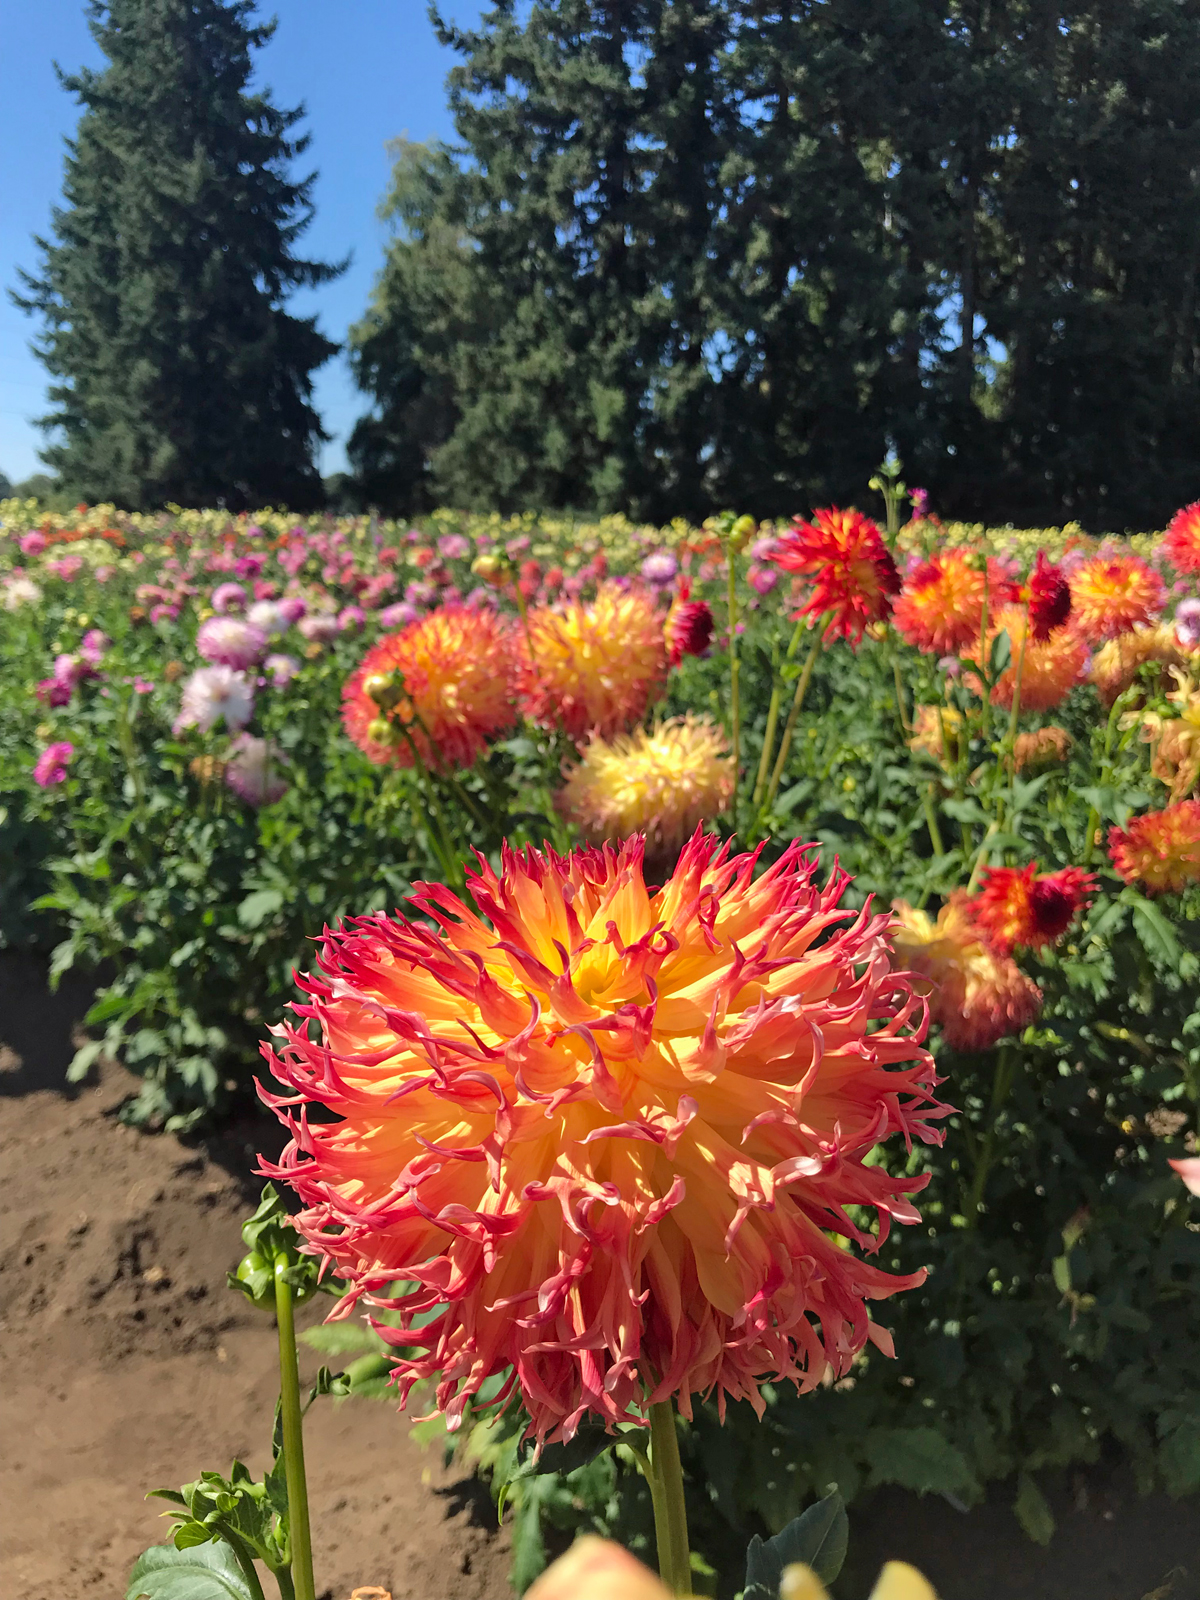 Flower farms in Oregon. Pink & yellow dahlias with trees and sky in the background. Swan Island Dahlia farm in Oregon.